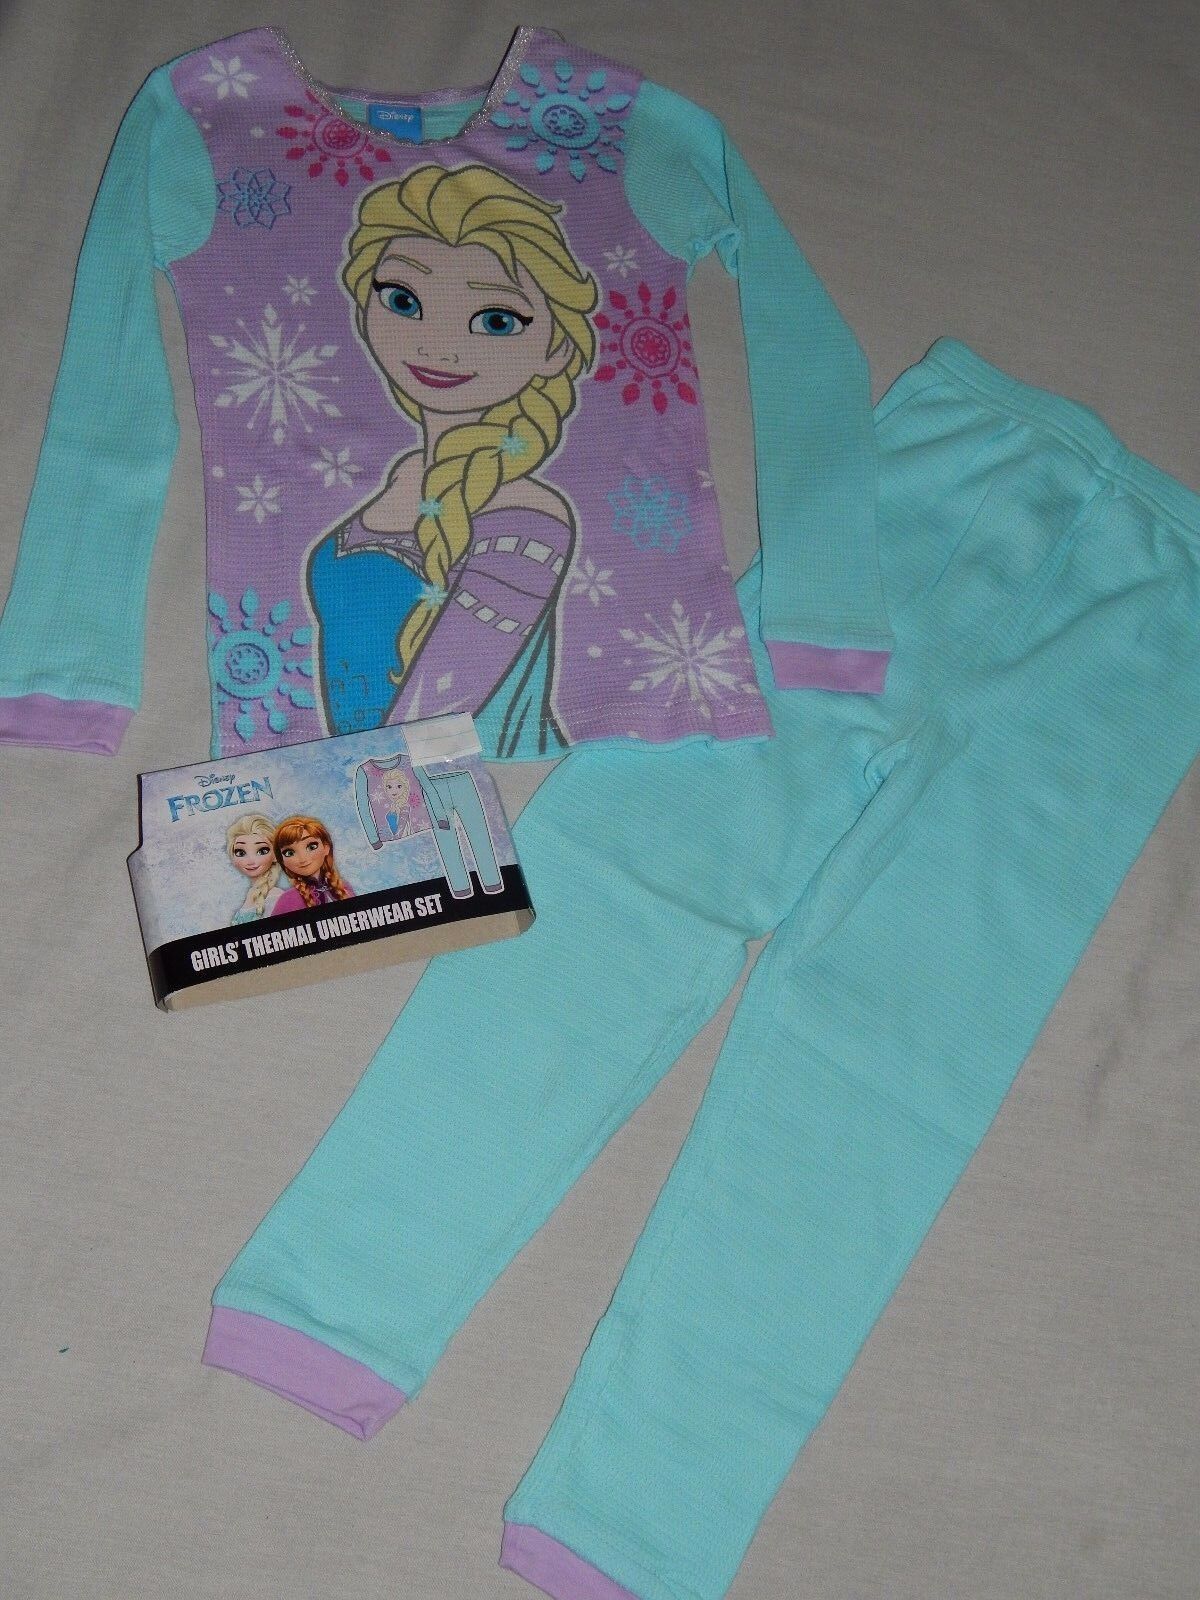 Girls Thermal Underwear Size 10 Princess and 38 similar items